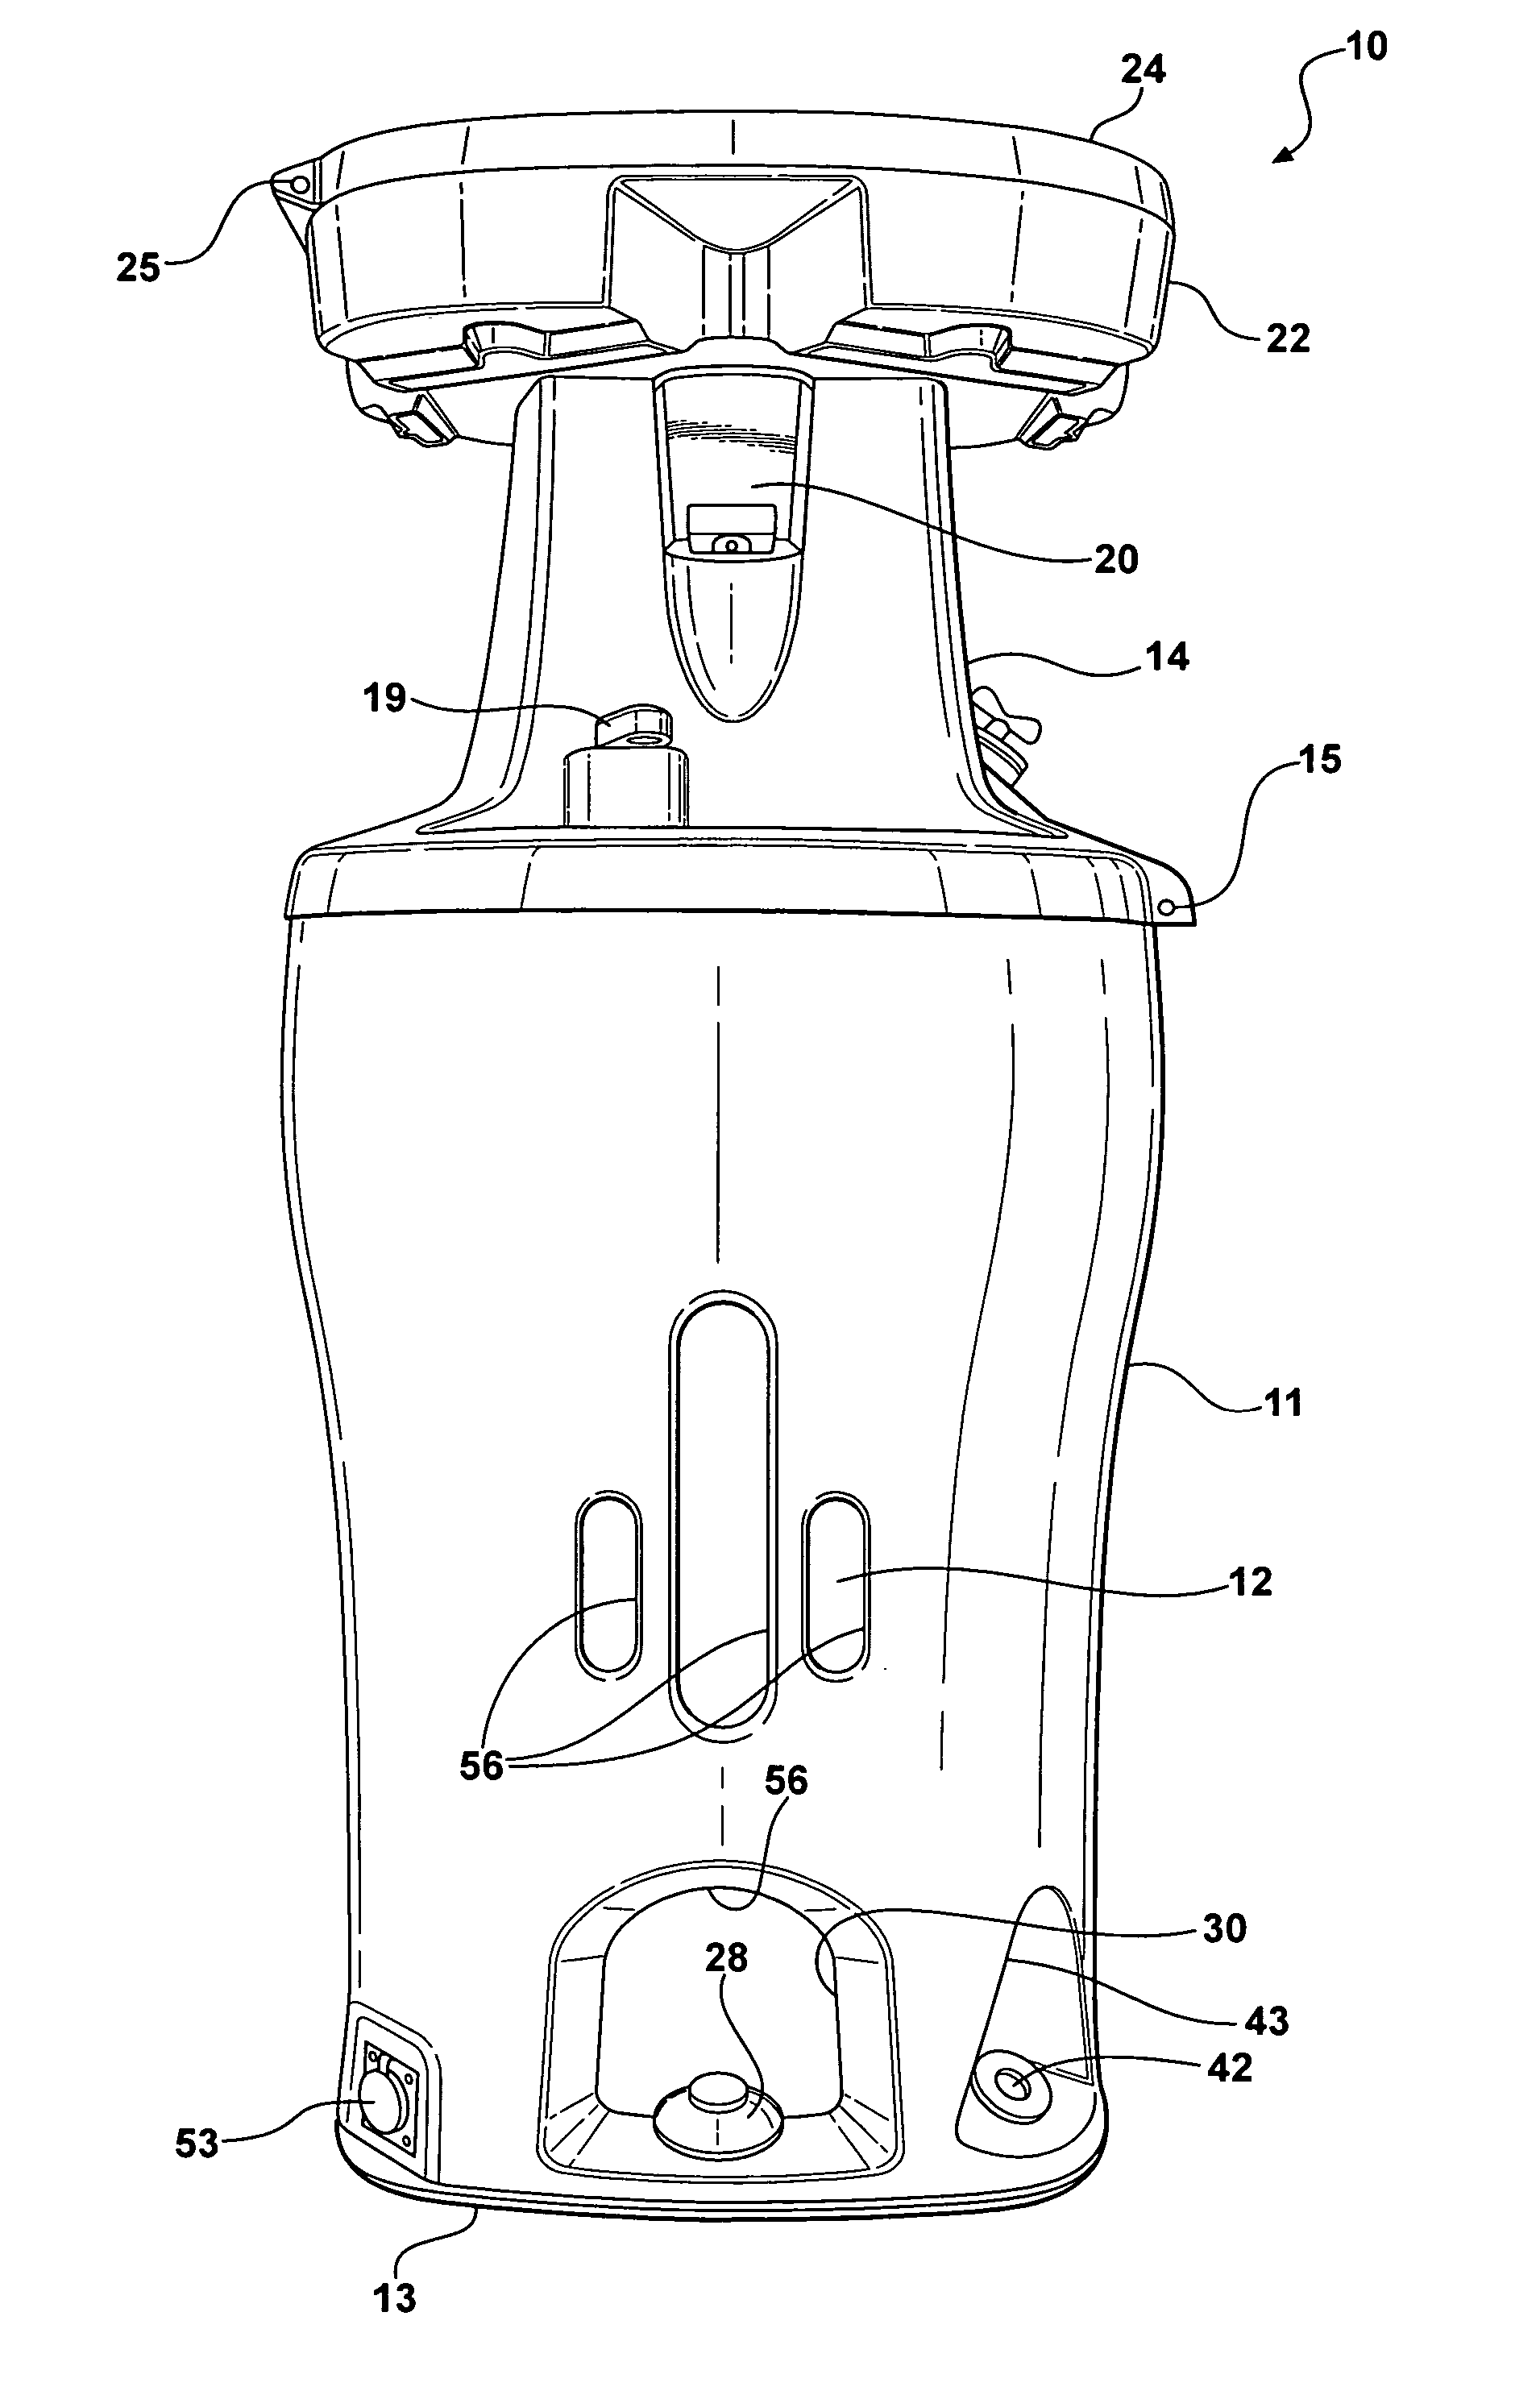 Used water removal system for a portable, hand-wash sink station